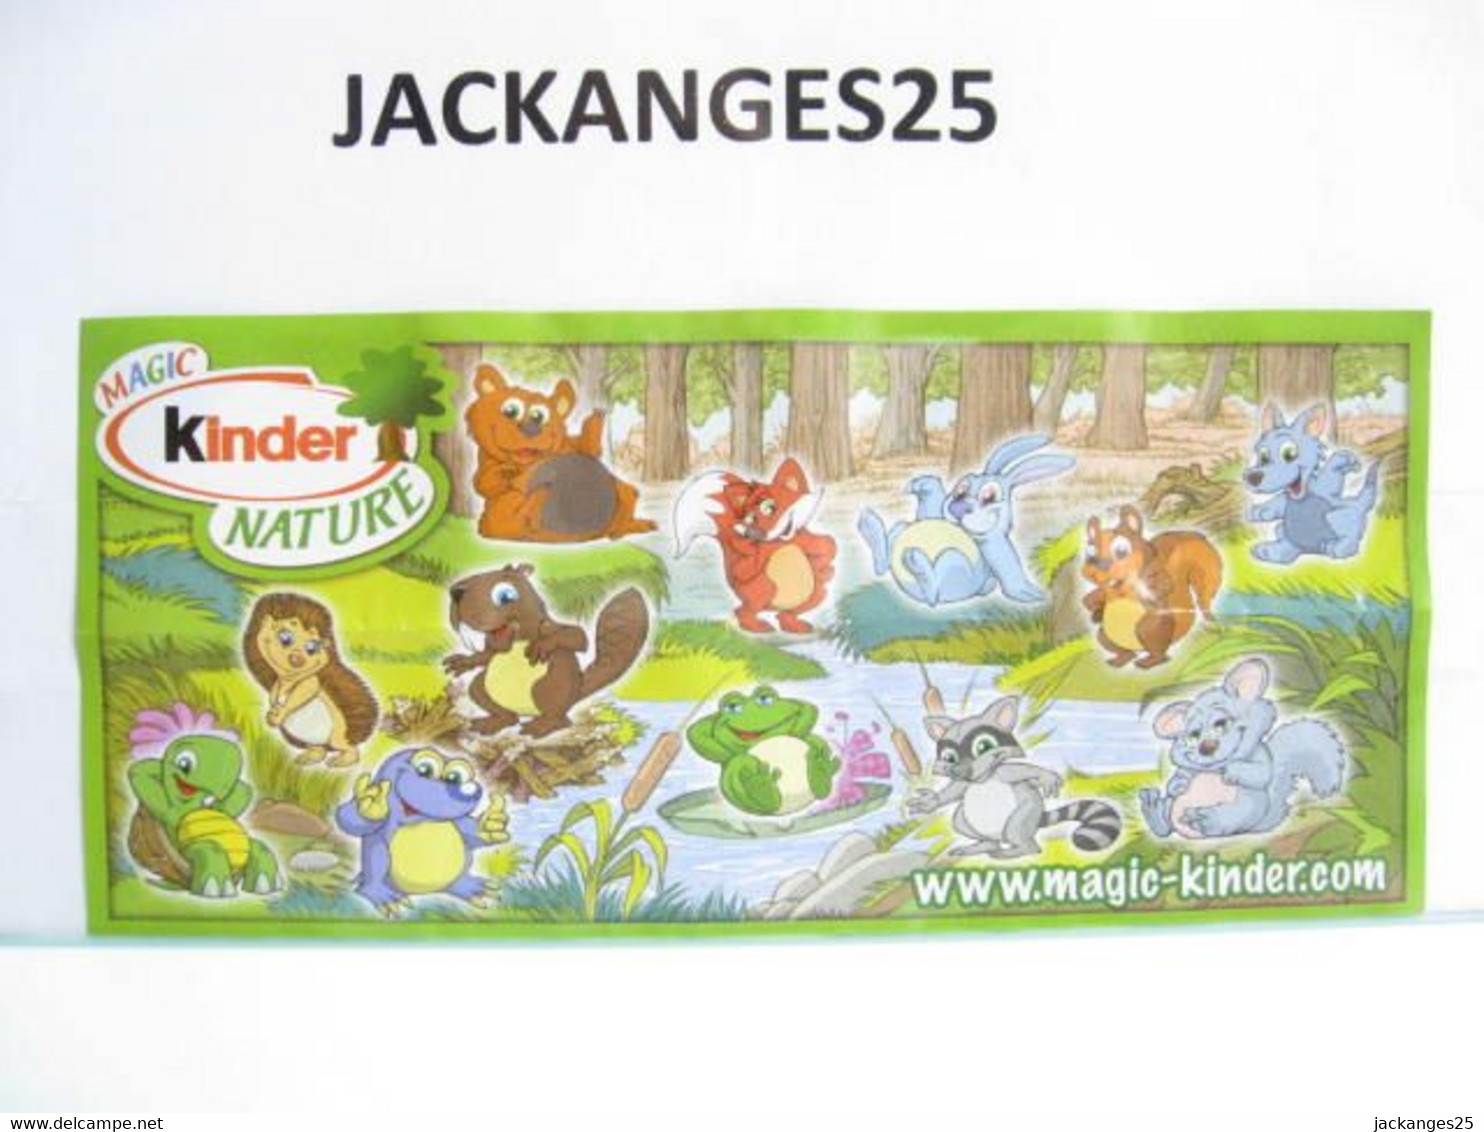 KINDER MPG UN 14 A LOUP ANIMAUX NATURE NATOONS TIERE 2010  2011 + BPZ A NATURE - Families